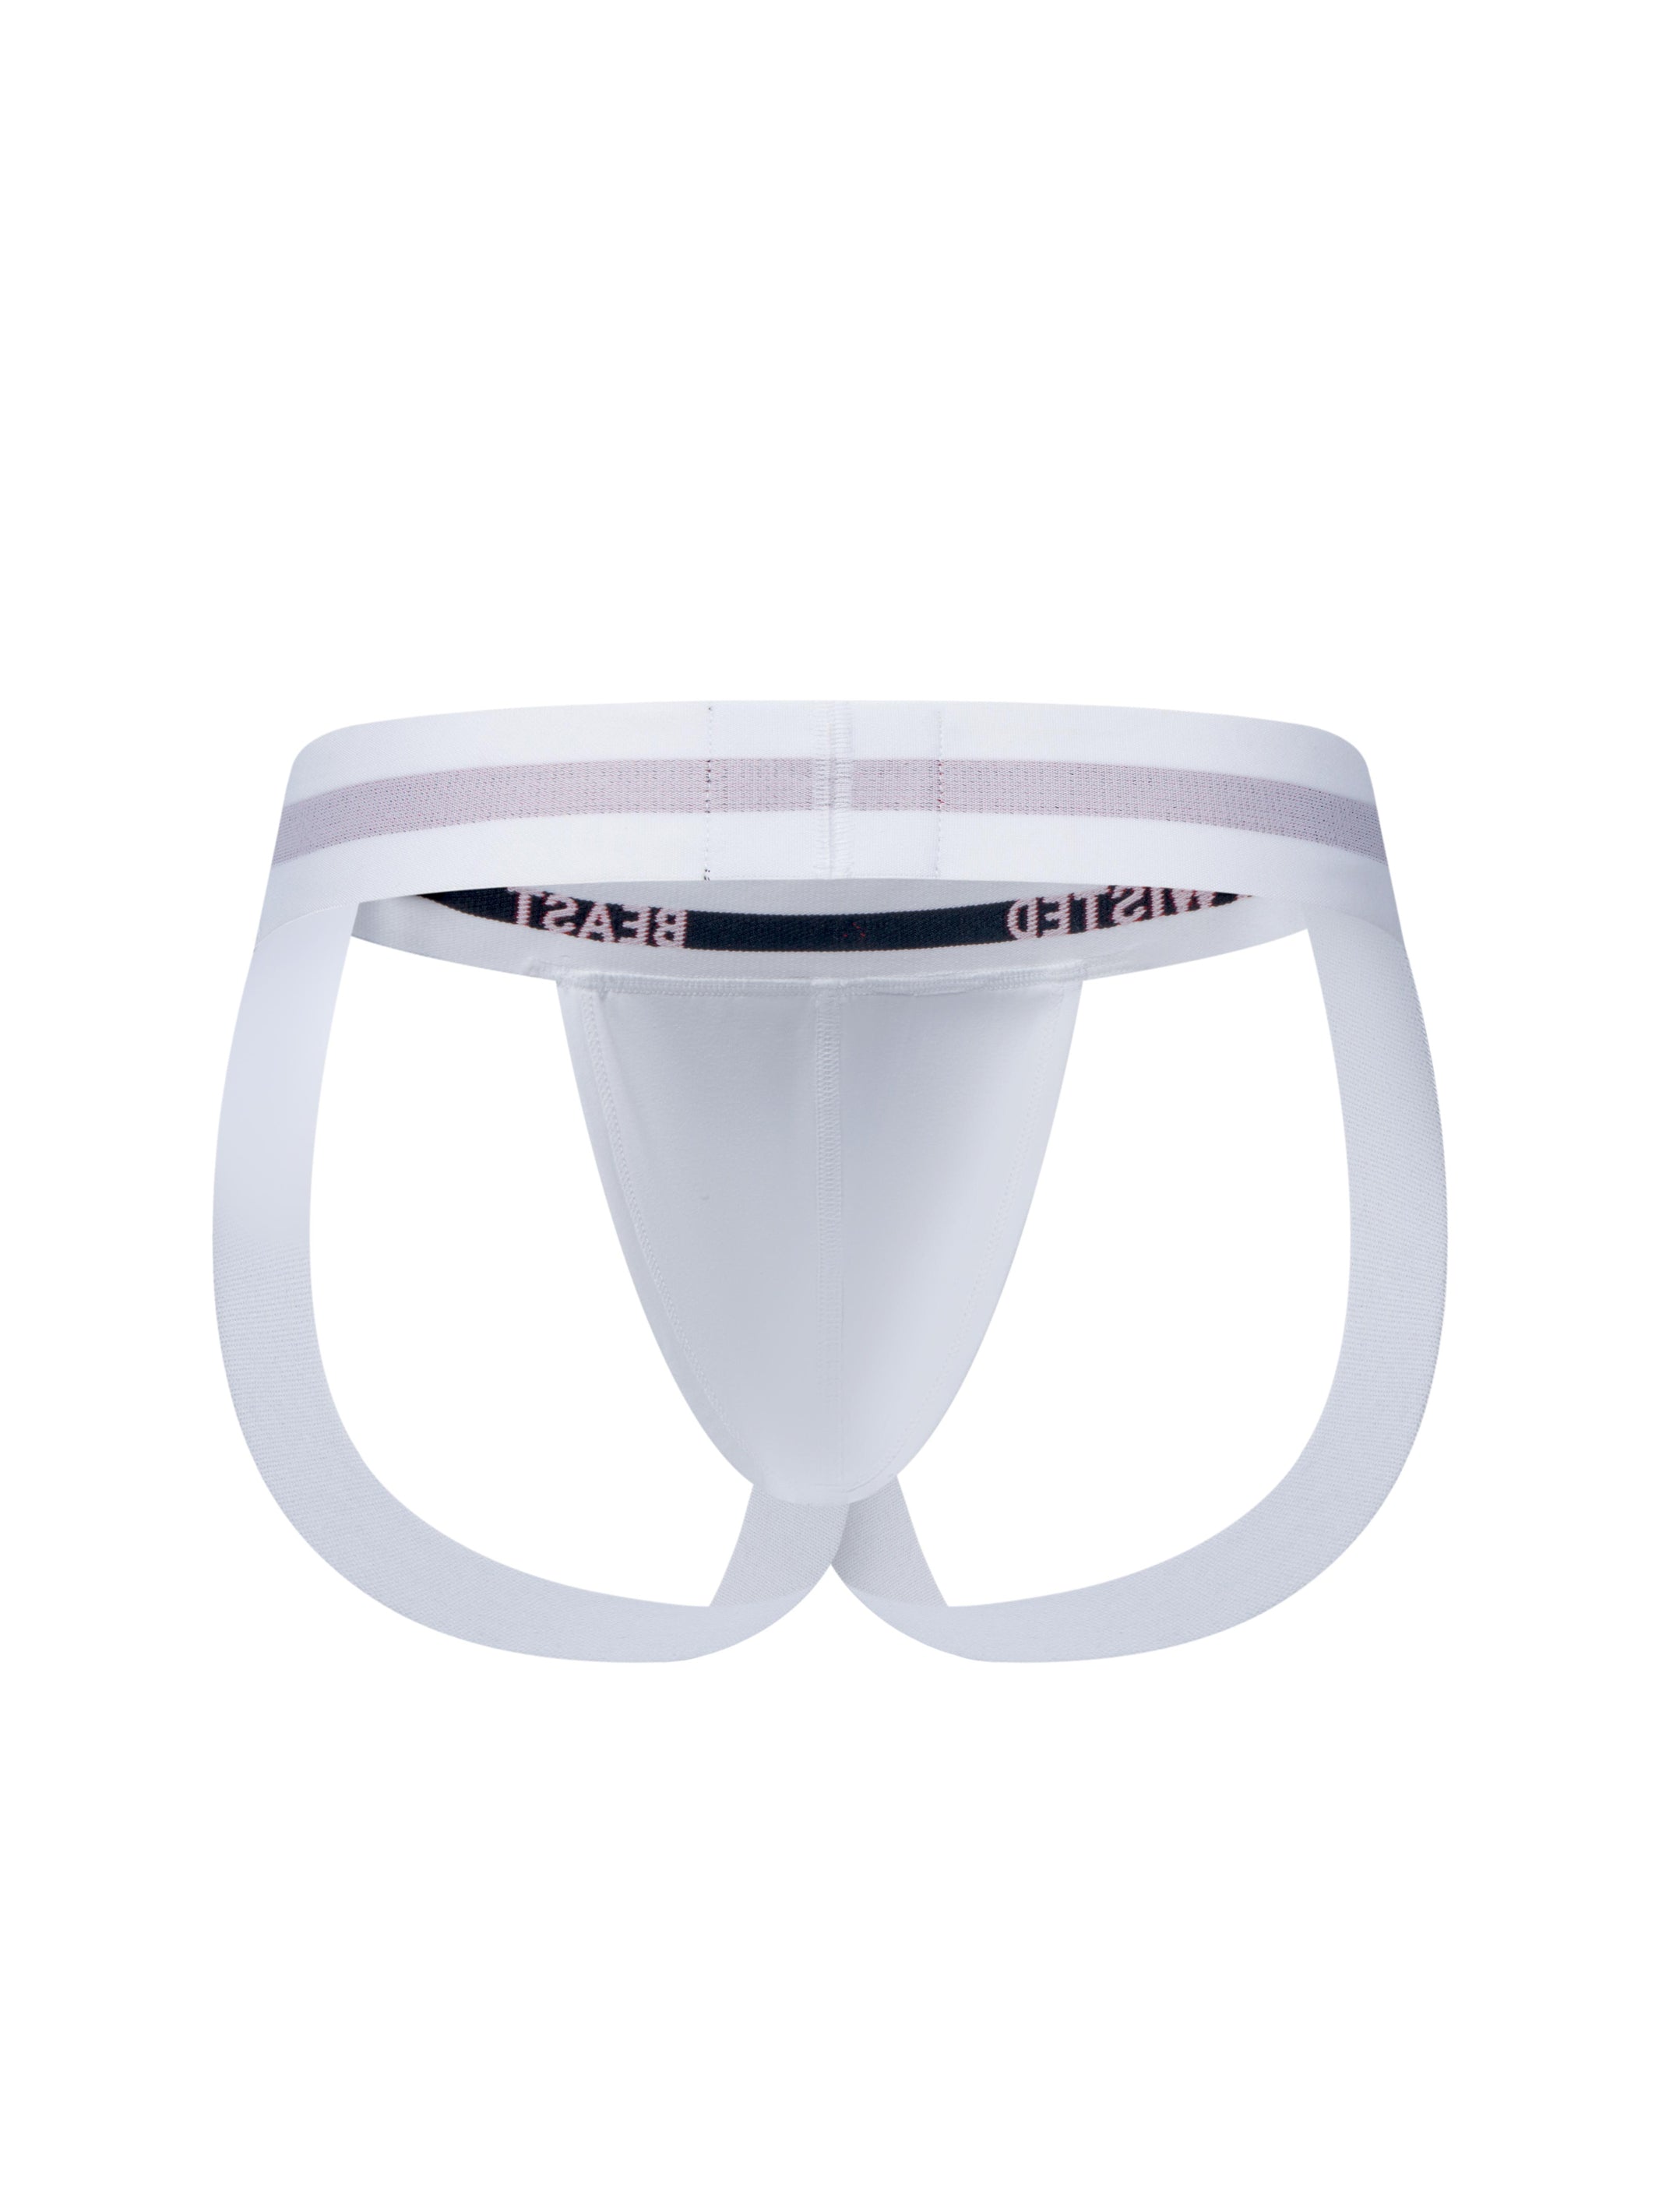 A back product photo of a white Insignia Jock White by Twisted Beast.